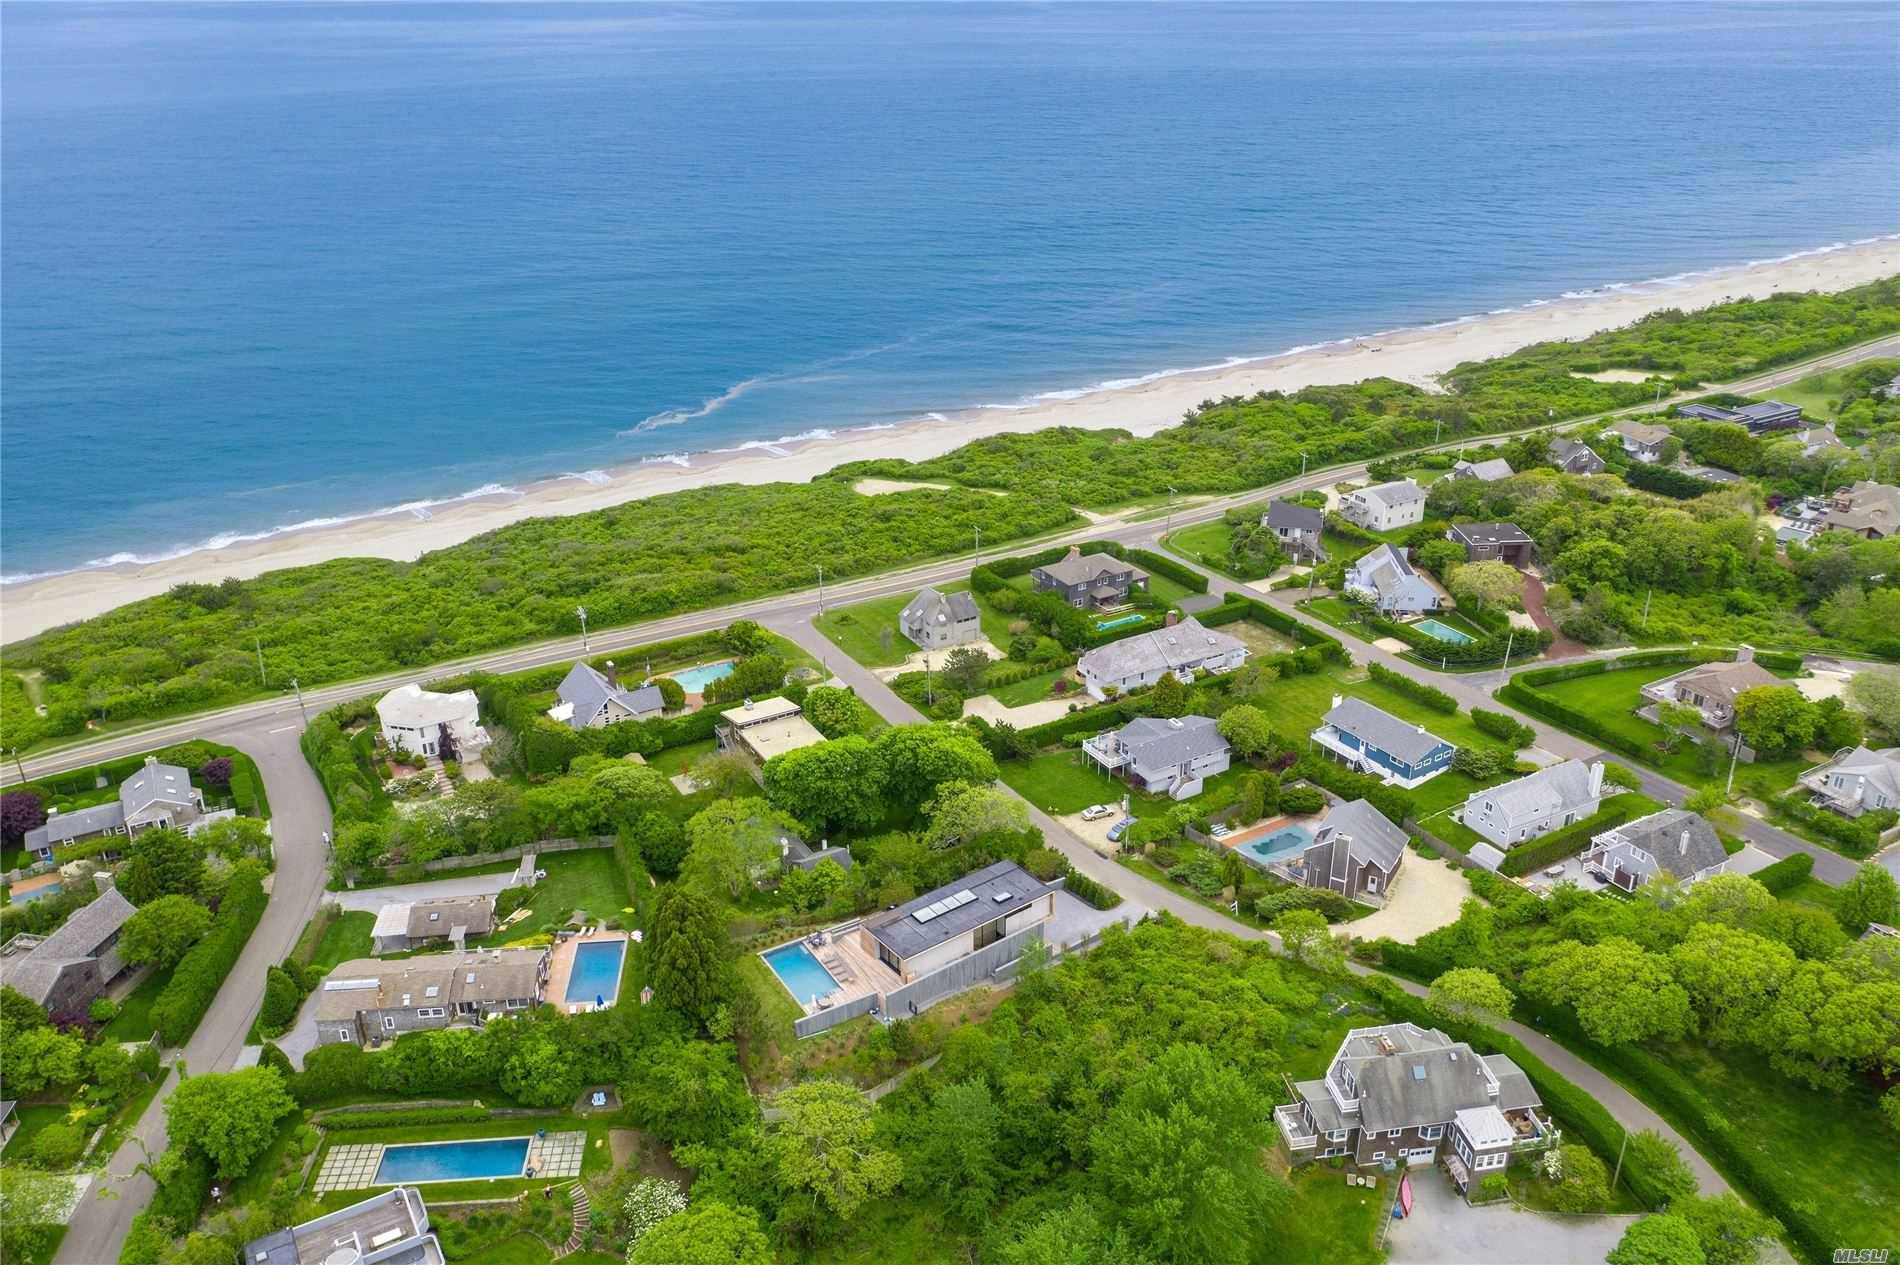 Once in a lifetime opportunity to build a custom home in Montauk with water views in close proximity to the ocean.